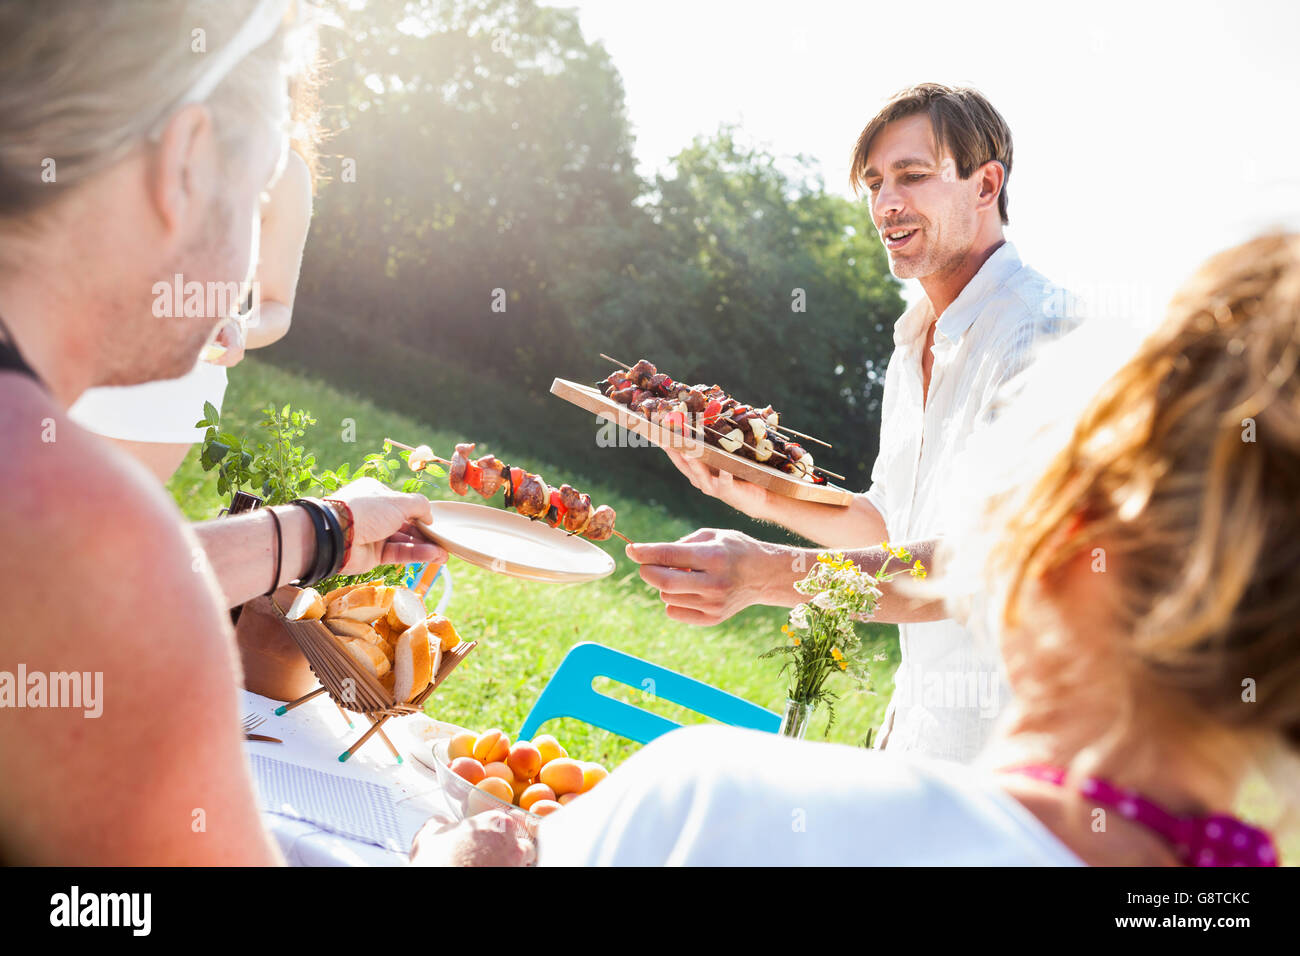 Friends barbecuing on the riverside, foothills of the Alps, Bavaria, Germany Stock Photo